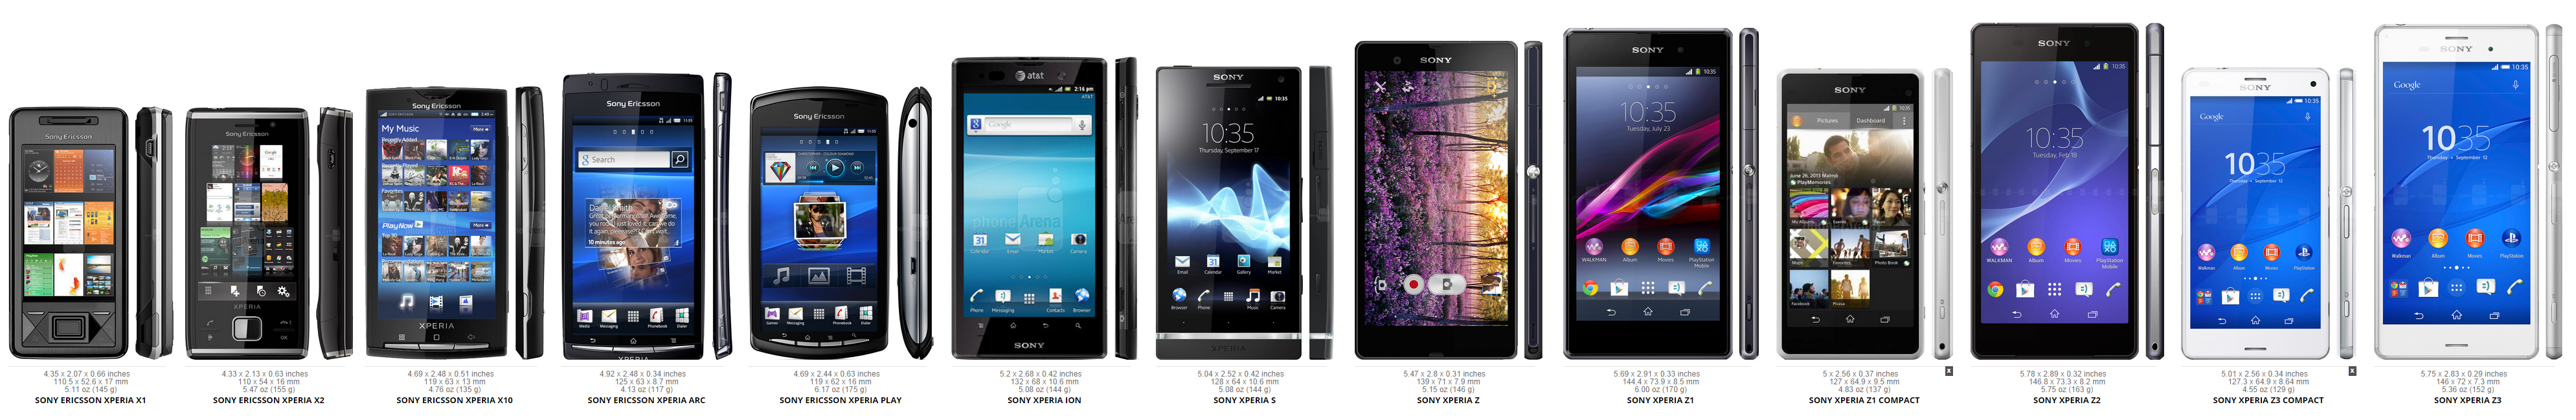 The evolution of Sony's Xperia series from the Windows-based X1 to the brand new Z3